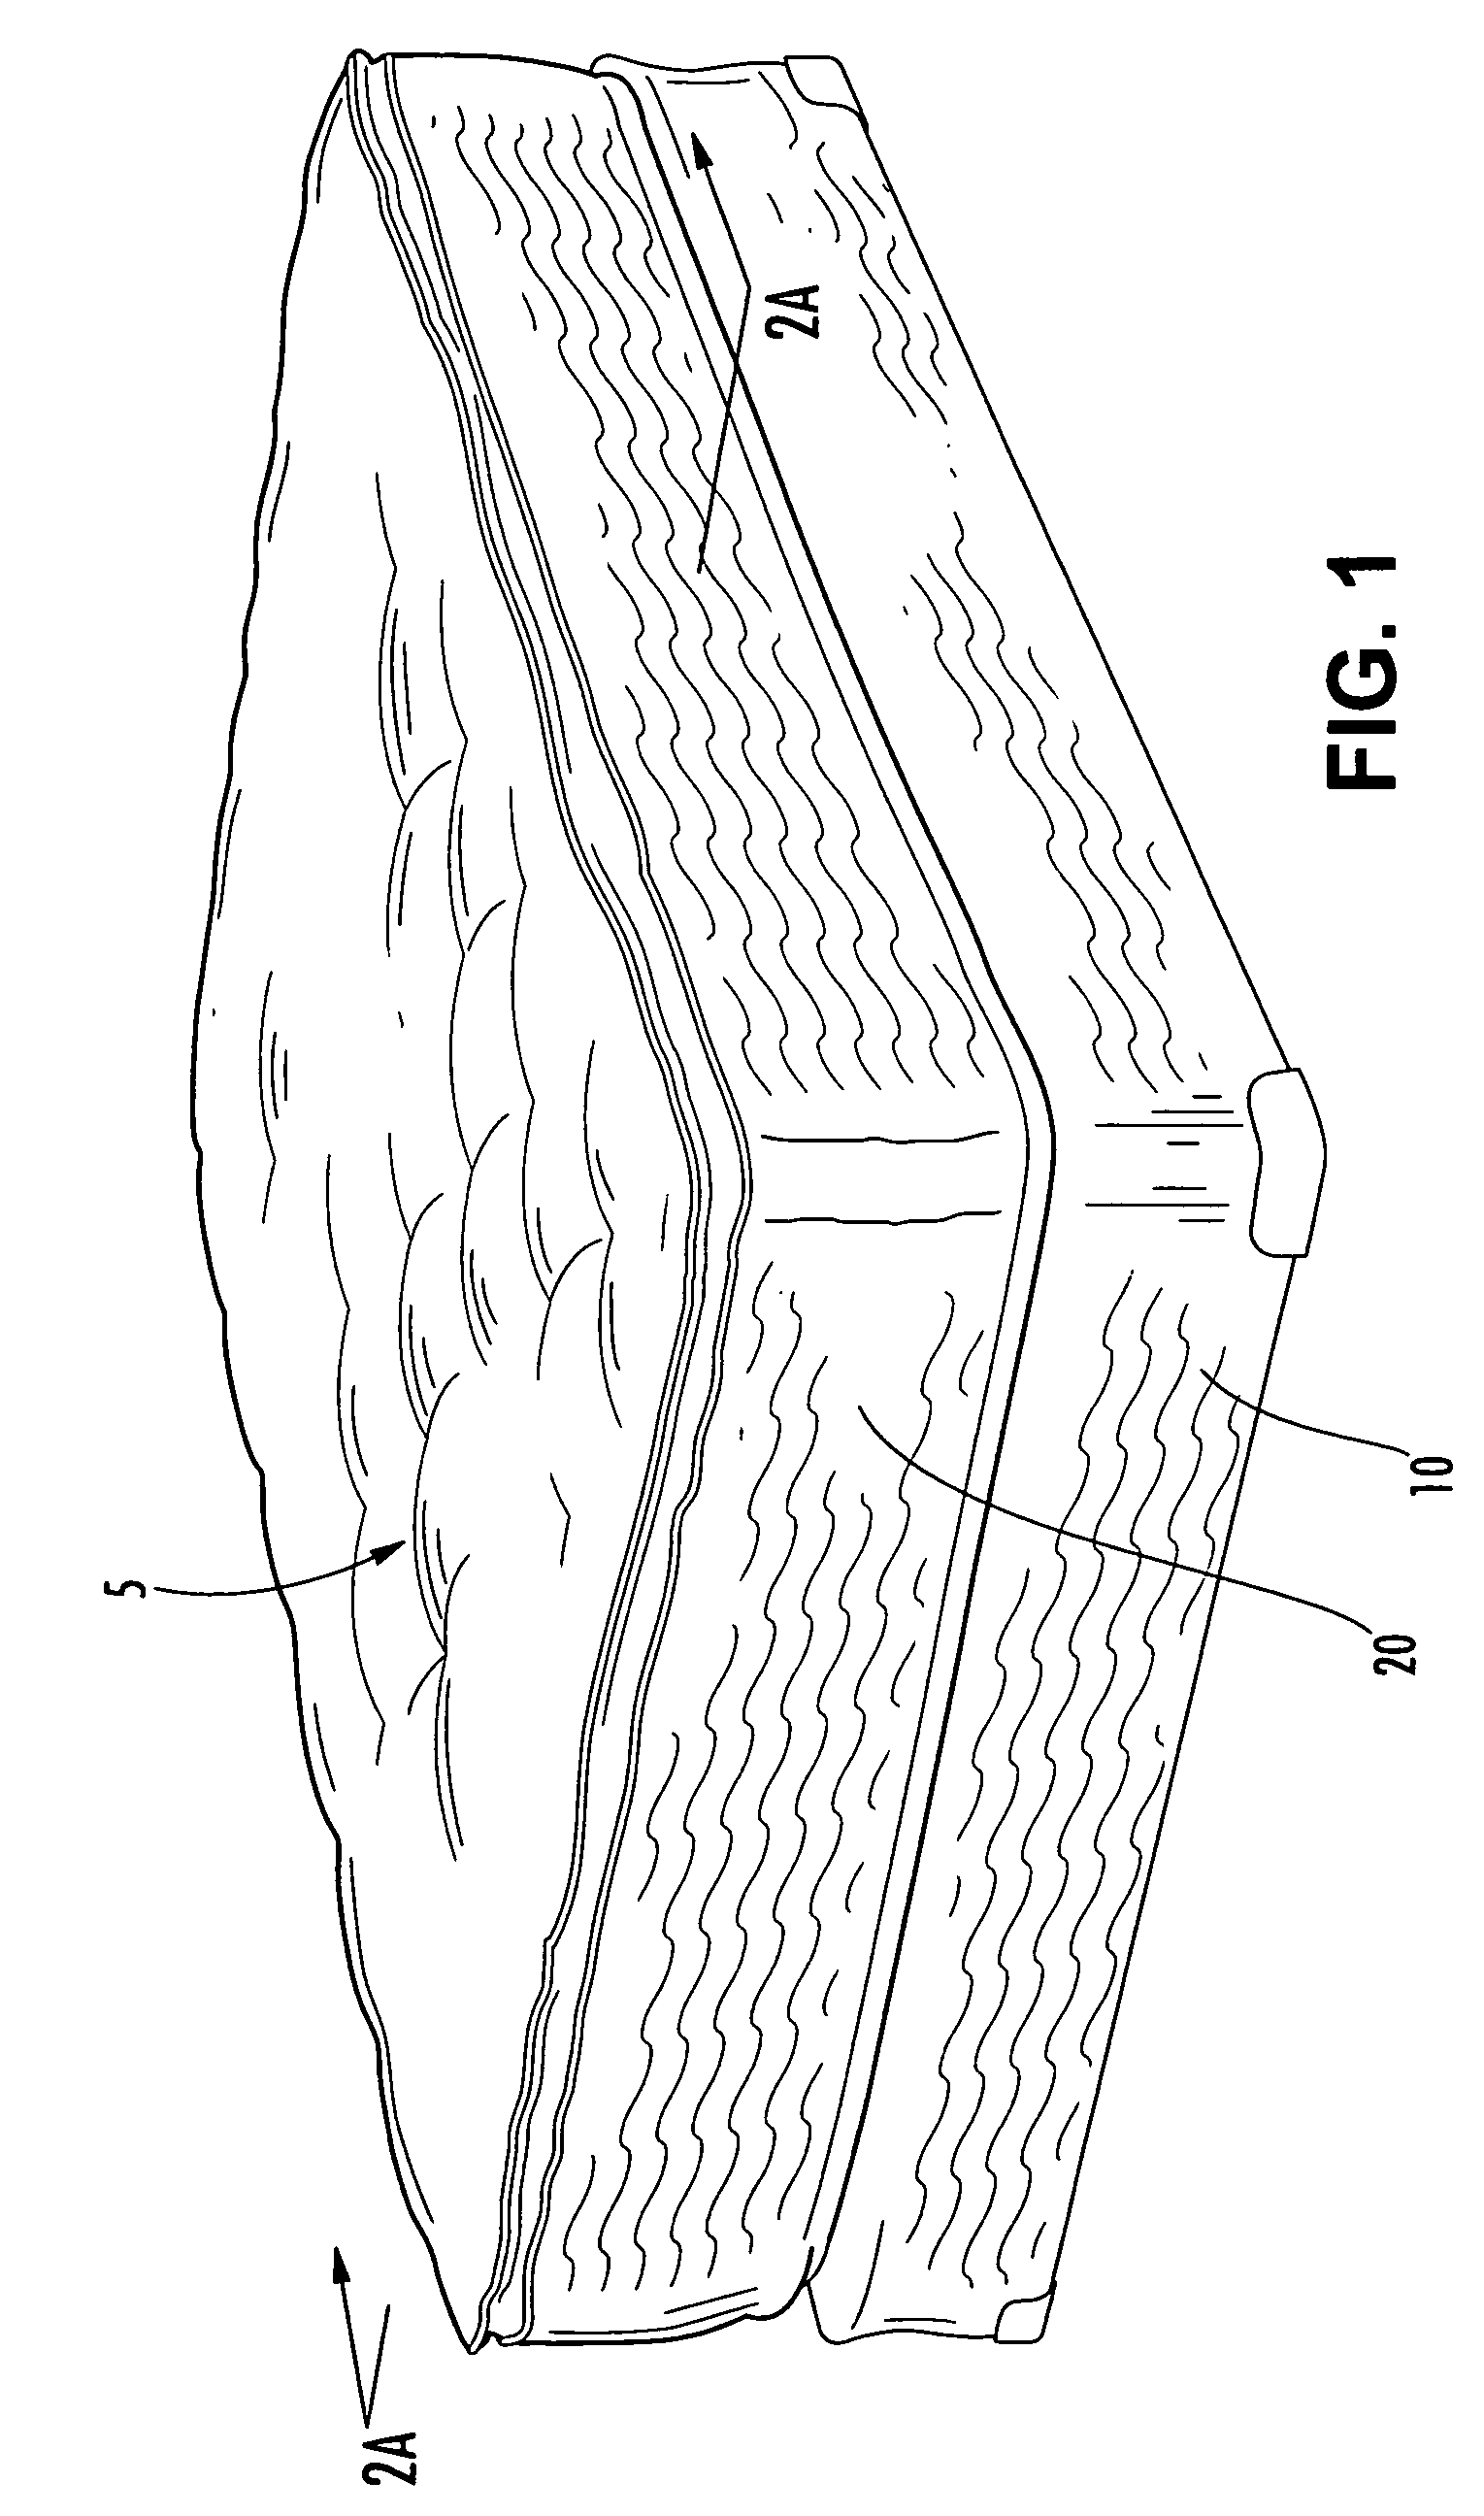 Heat and flame-resistant materials and upholstered articles incorporating same